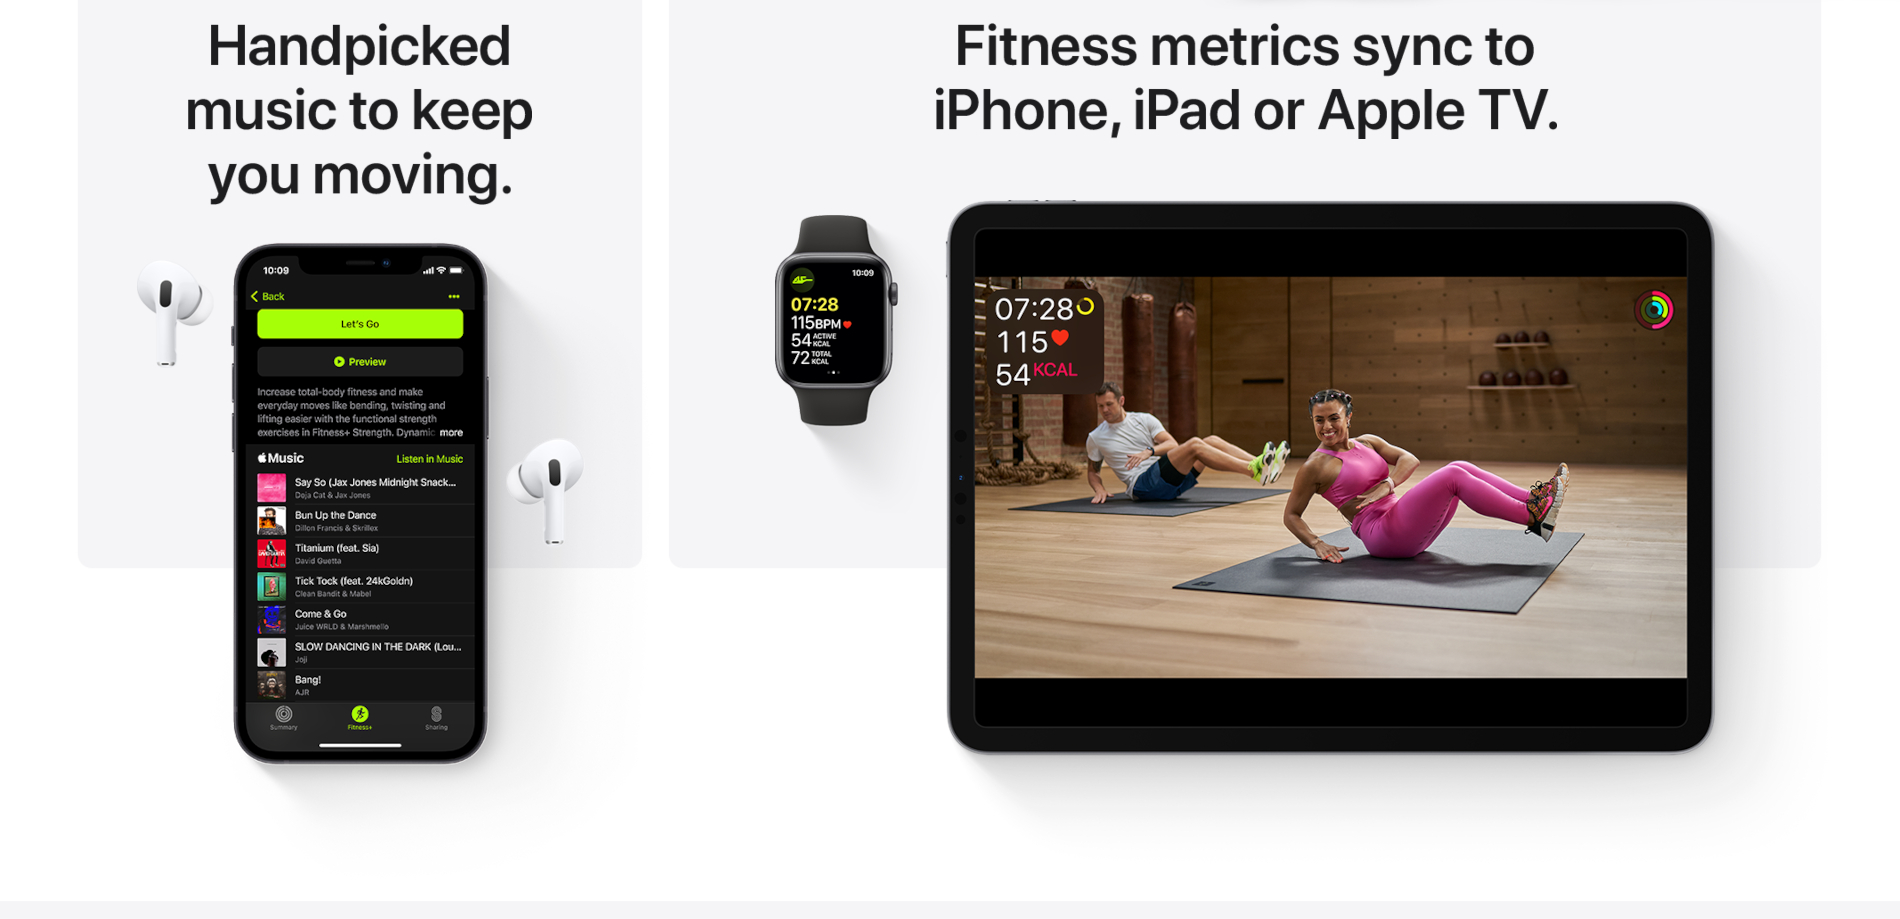 A fitness experience for everyone. Powered by Apple Watch.